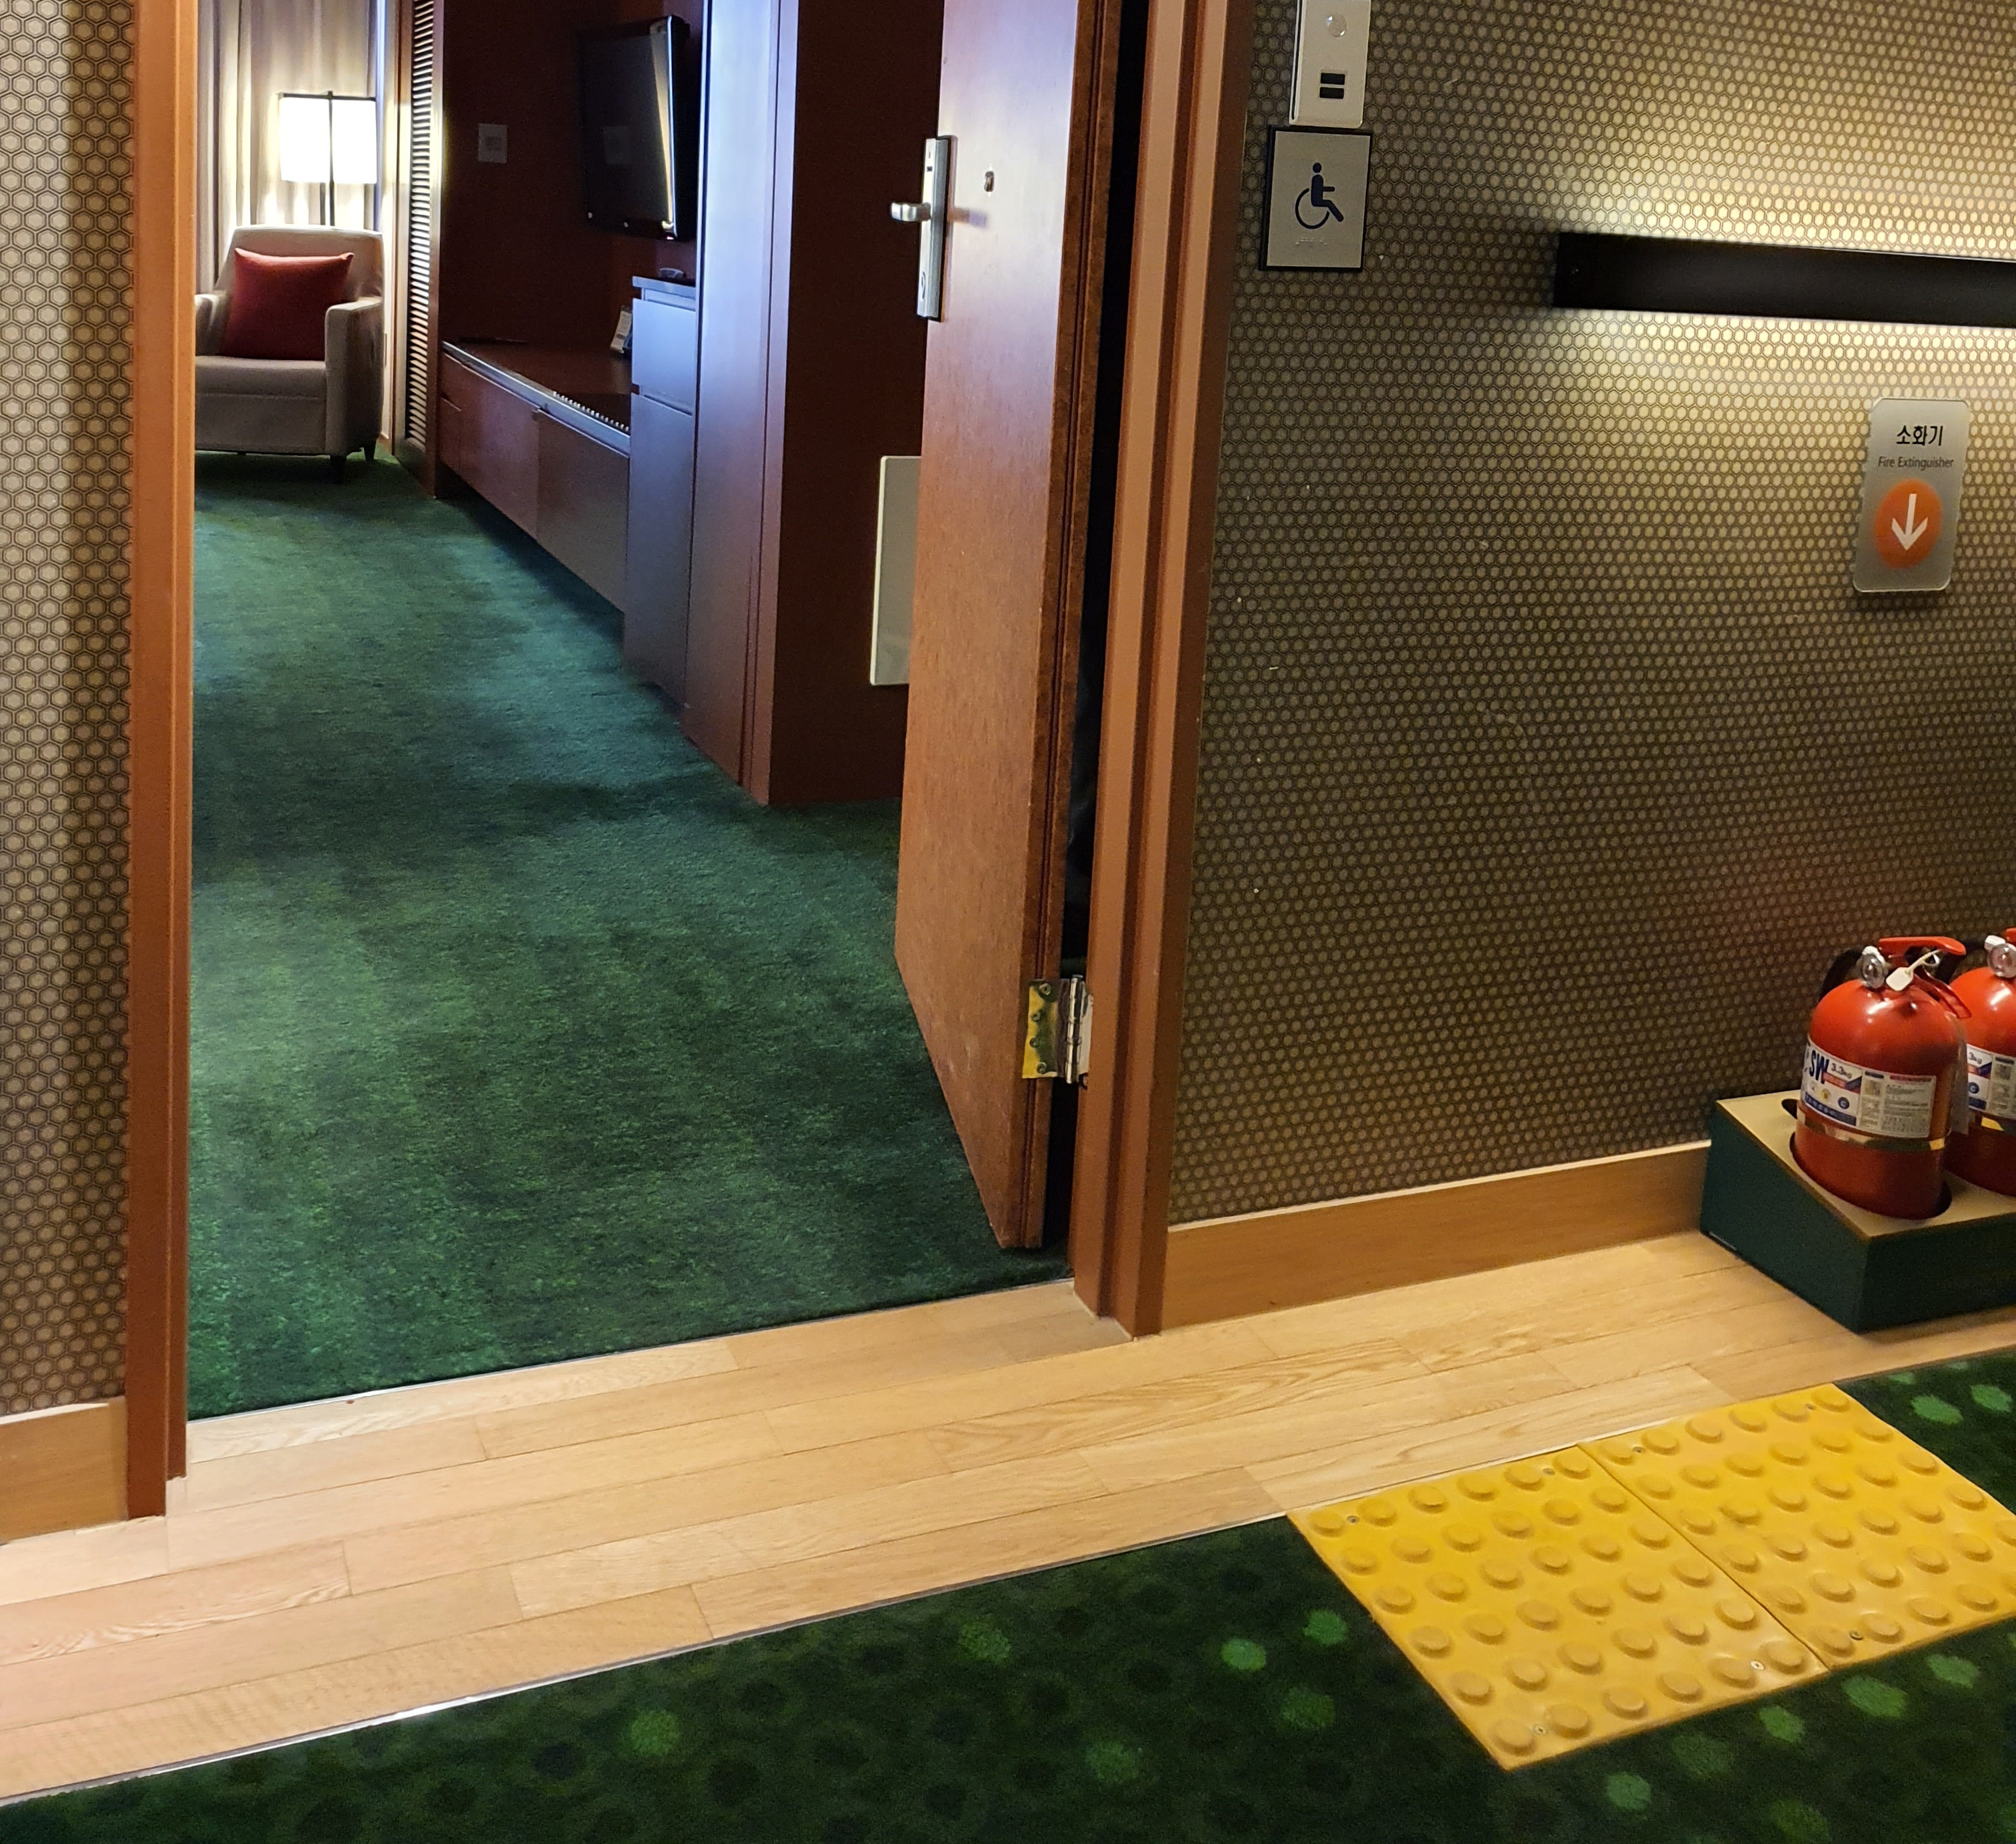 Accessible guestroom0 : Tactile paving installed on the right side in front of the guest room door